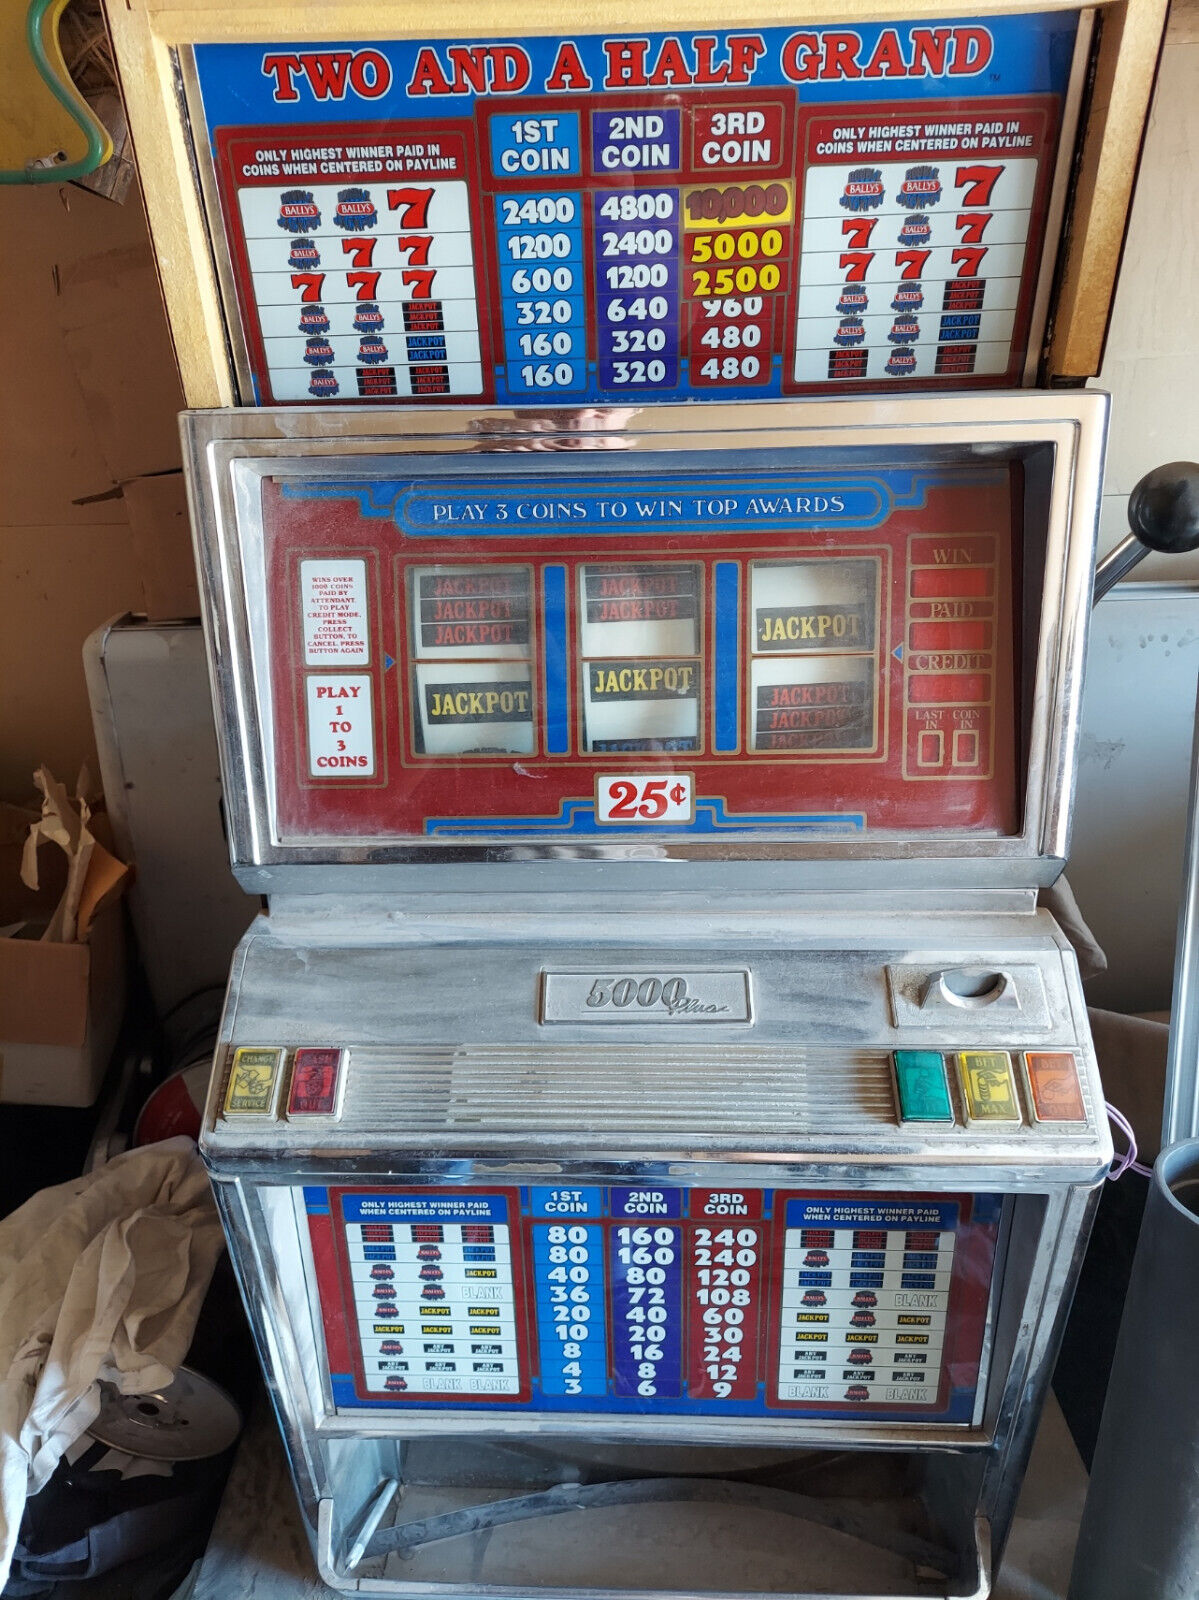 Slot Machines  - Two (2) Units - Bally Quarter "two And A Half Grand" 5000plus